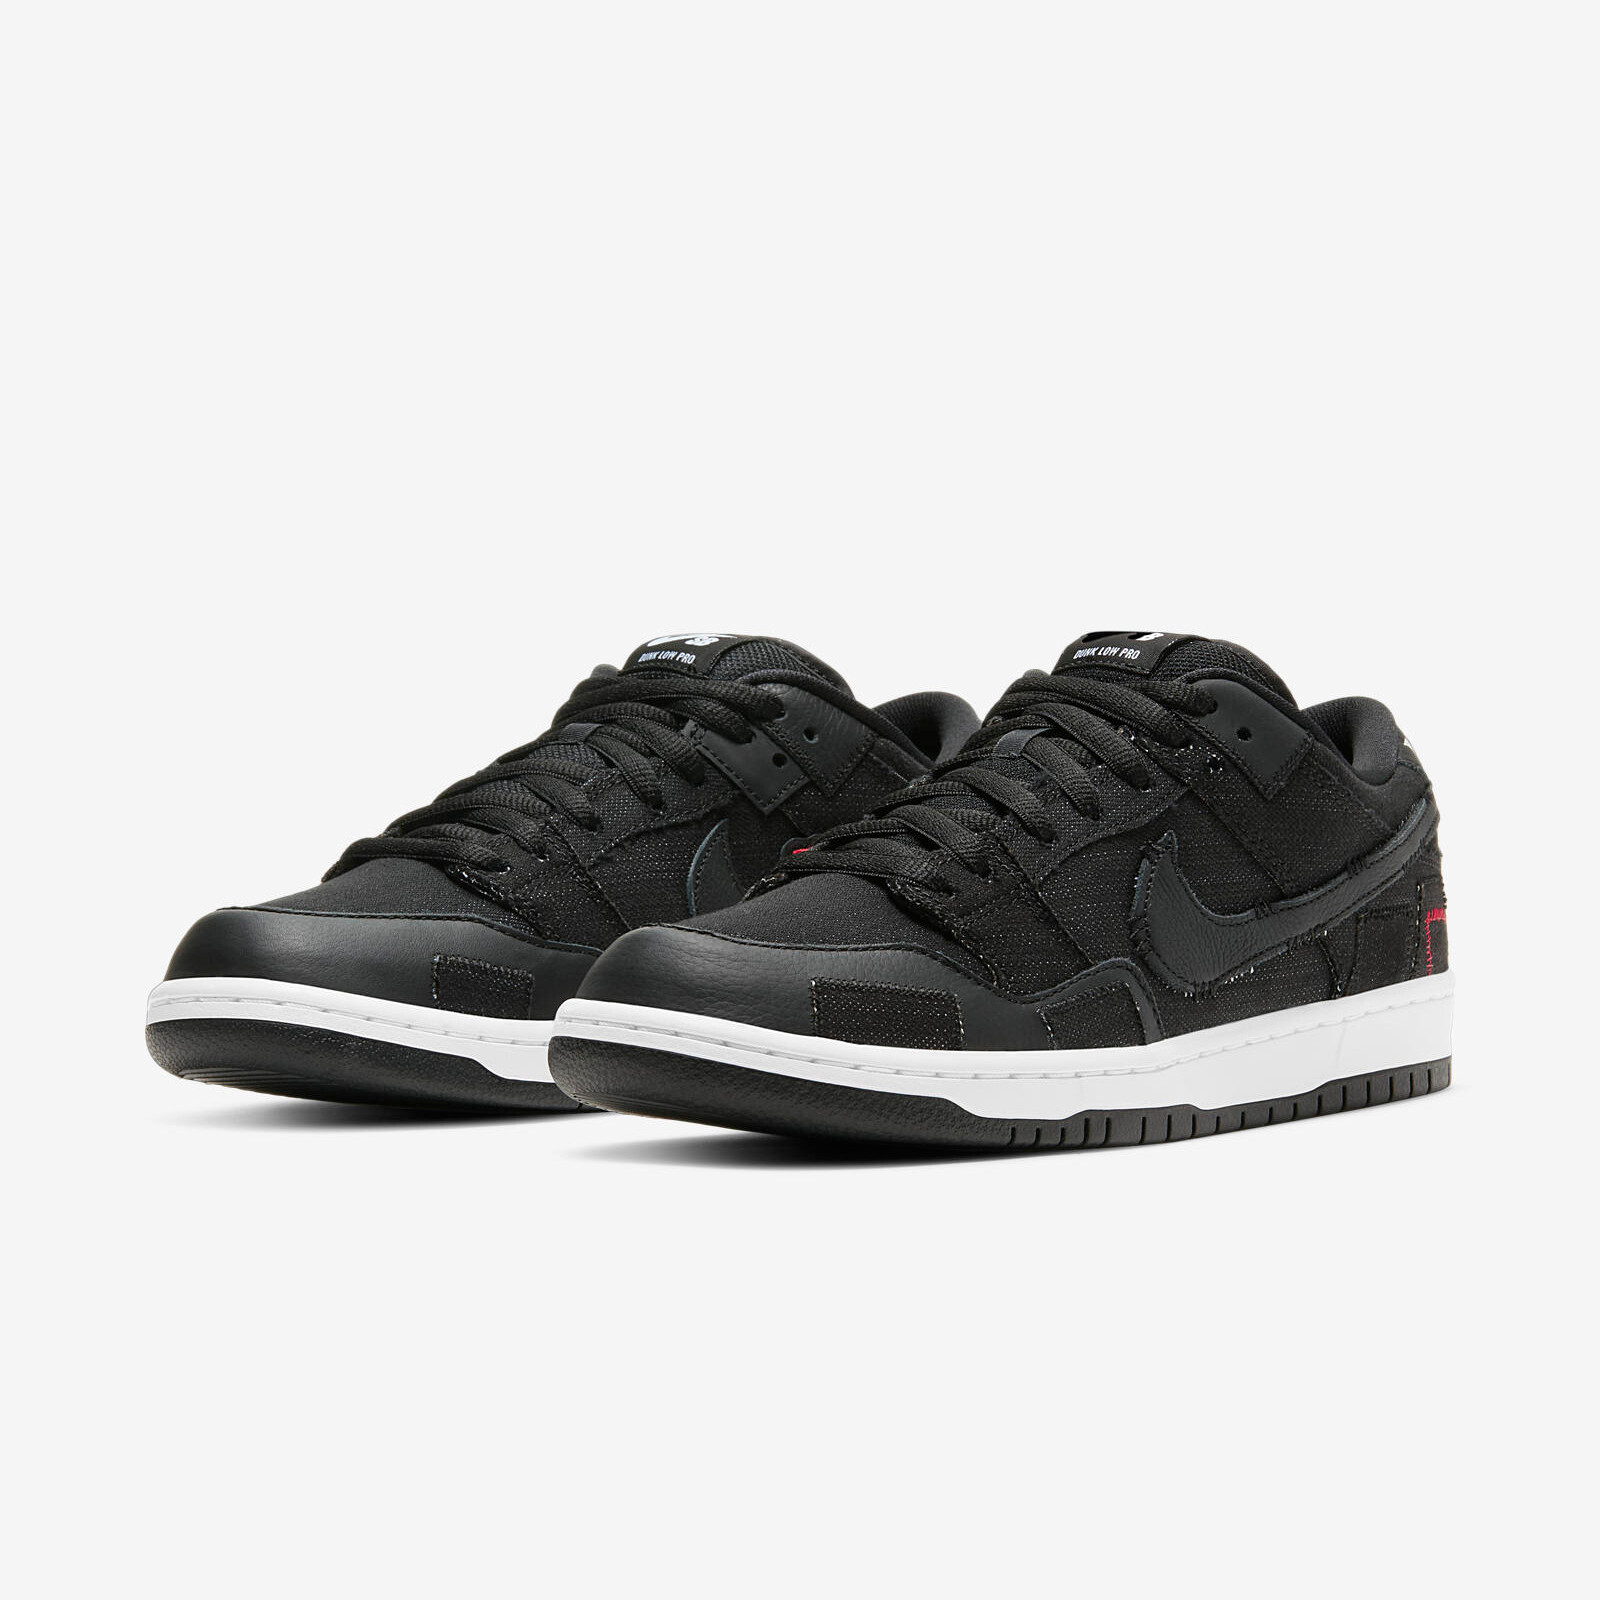 Nike SB Dunk Low x Verdy
« Wasted Youth »